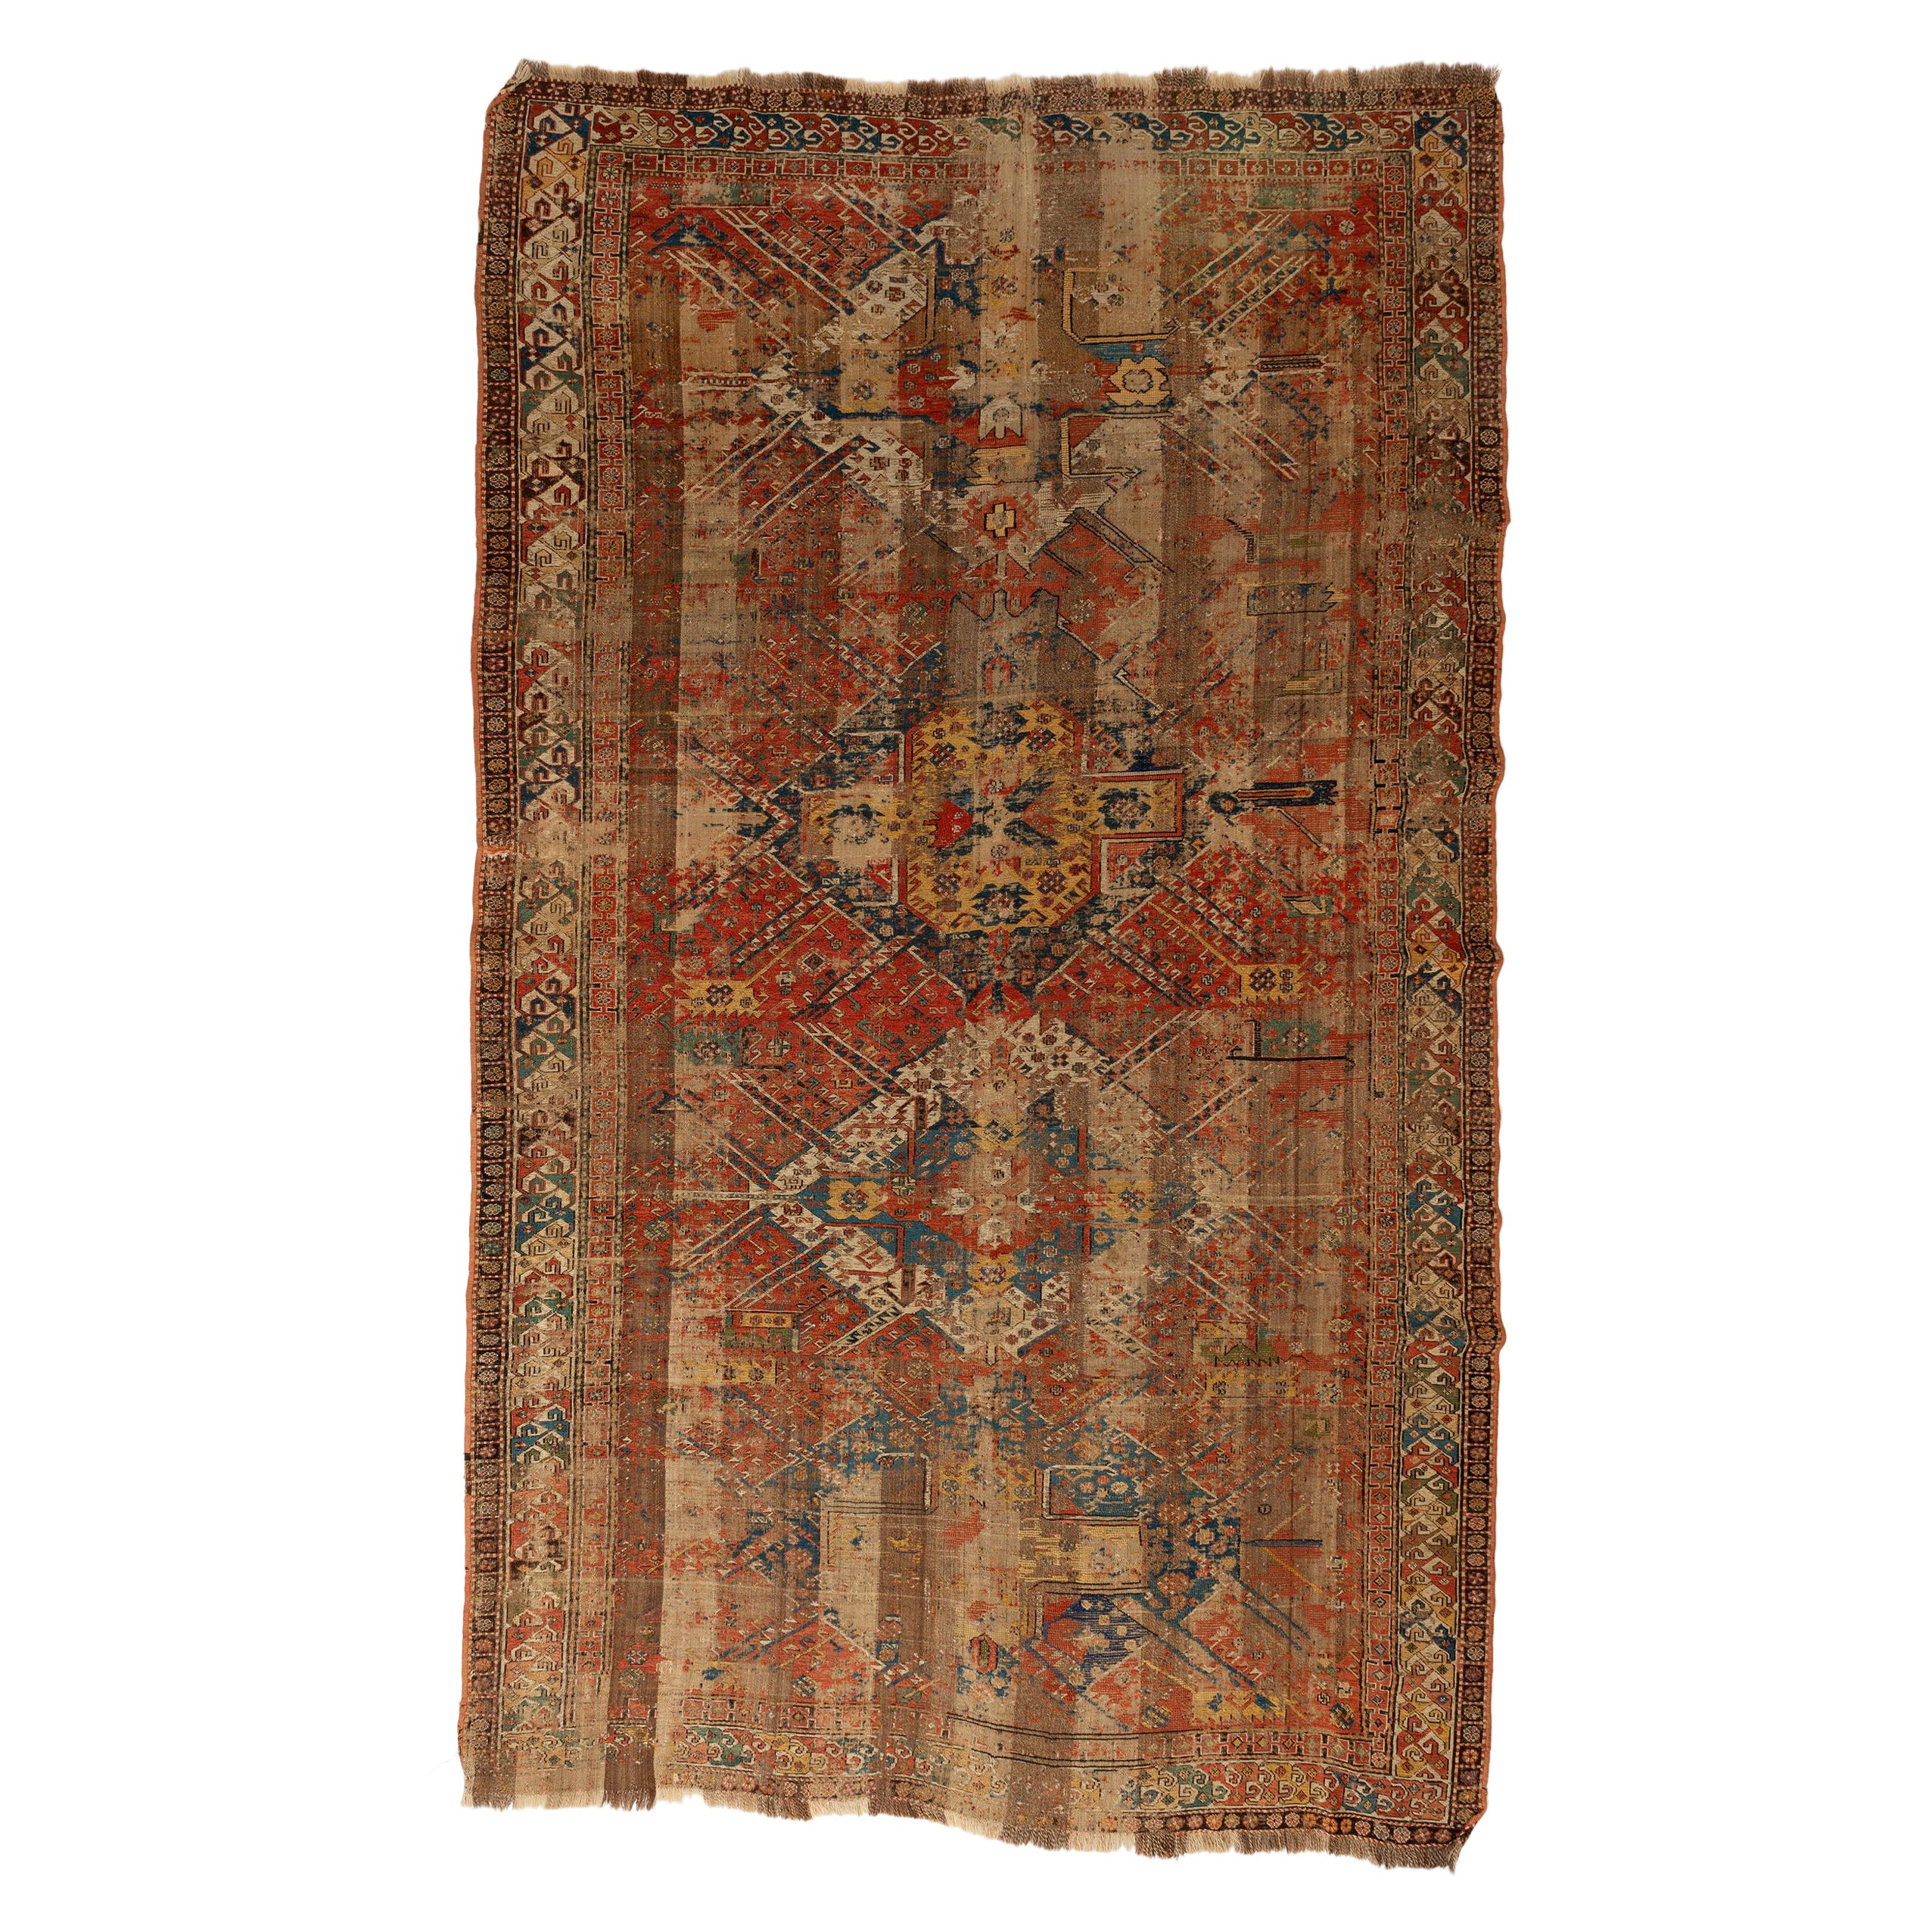 nr.1419 -- Rare antique fragment of a beautiful SUMAKH, still with its original colors: to imagine where it was lying...
Simply hung, beautiful to admire, even if very worn and it's only a fragment, still fascinating in the colors and in its